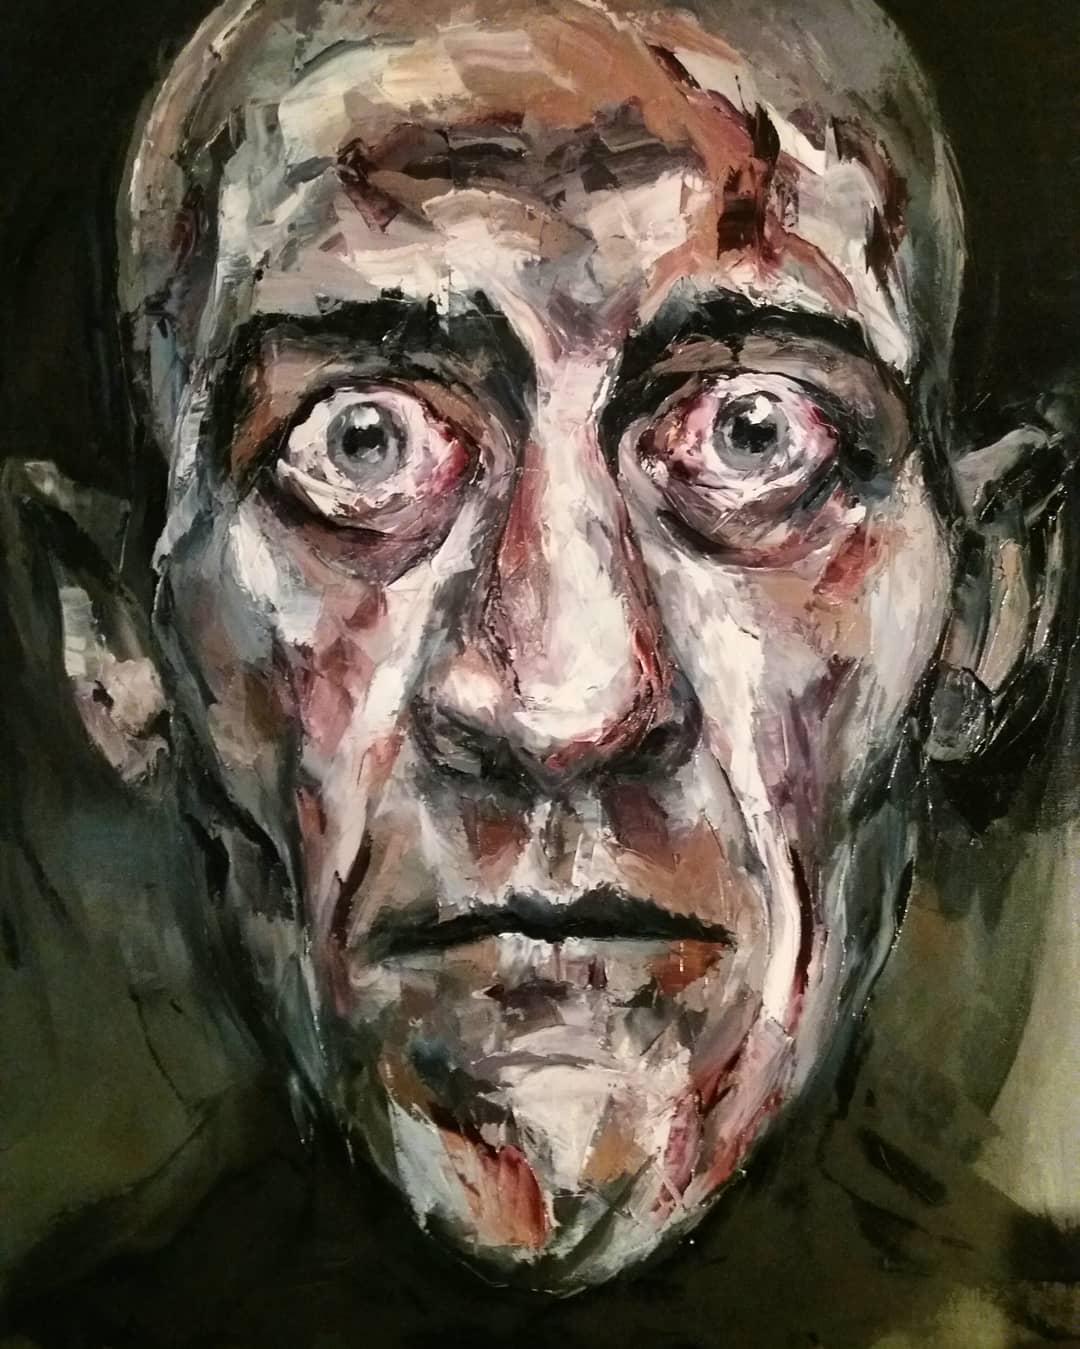 12. Portrait of a man with wide, bloodshot eyes created using palette knives.